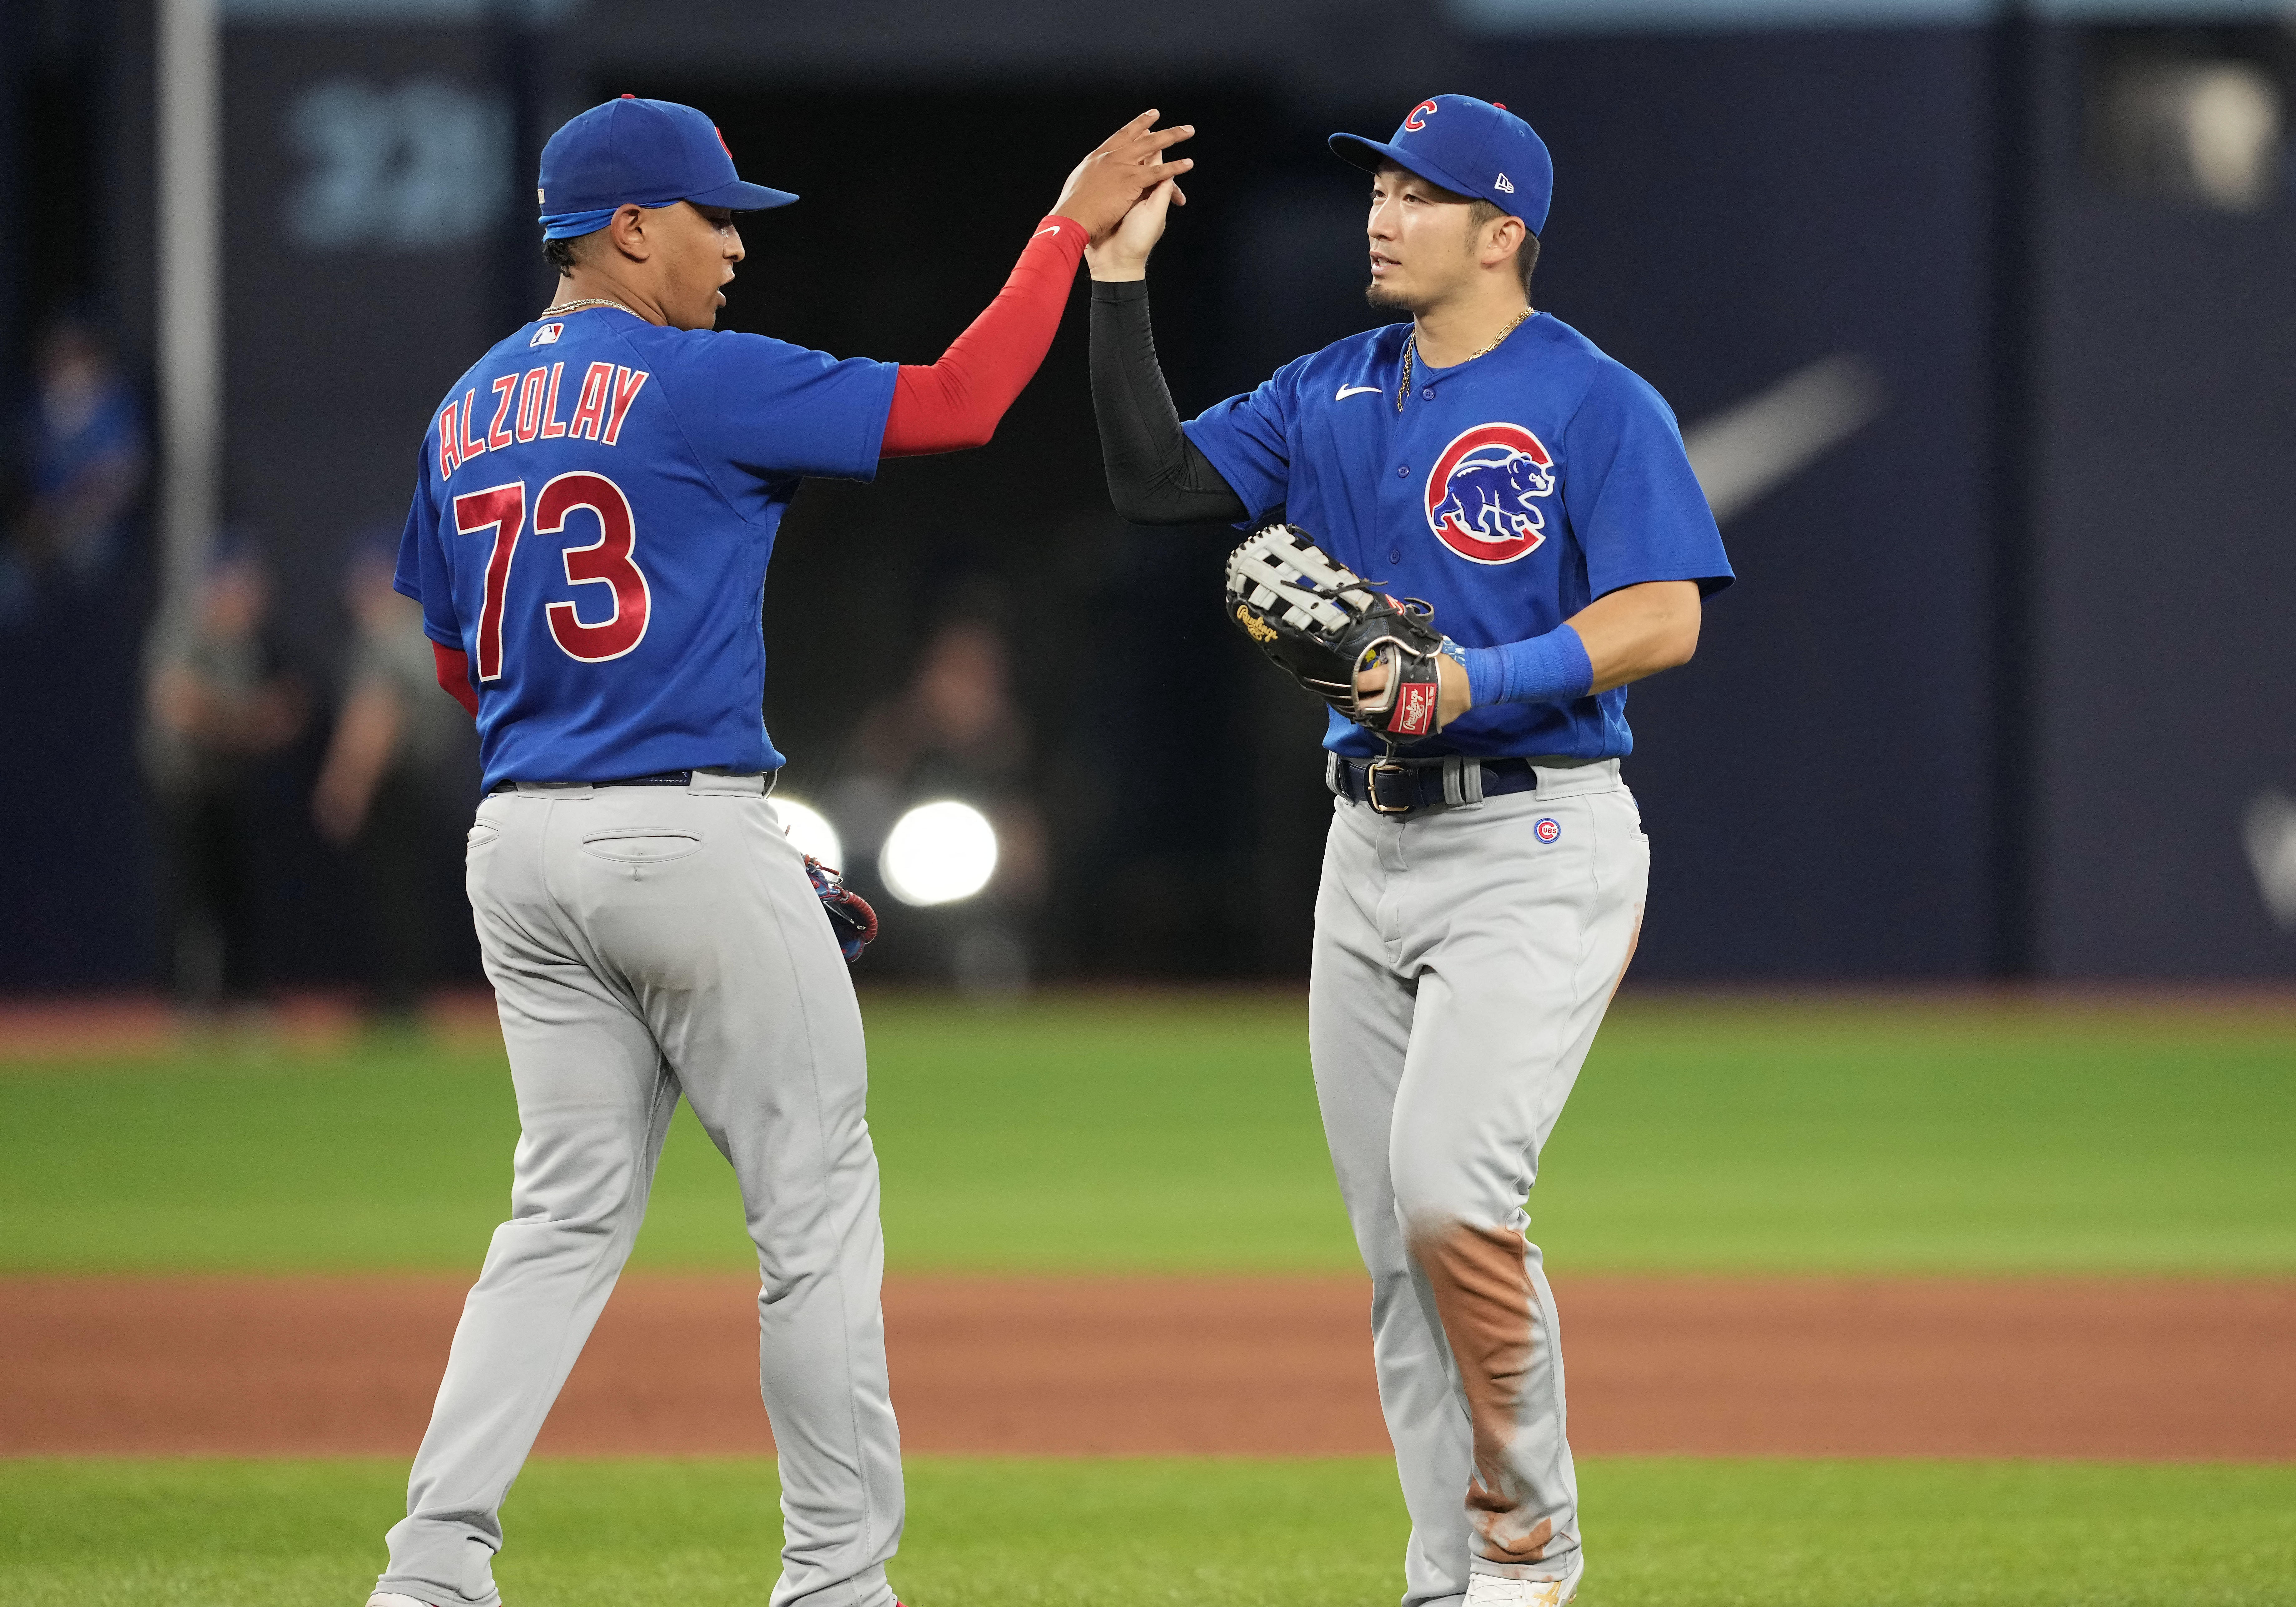 Bellinger and Hoerner homer, Assad pitches career-high 7 innings as Cubs  beat Blue Jays 6-2 MLB - Bally Sports